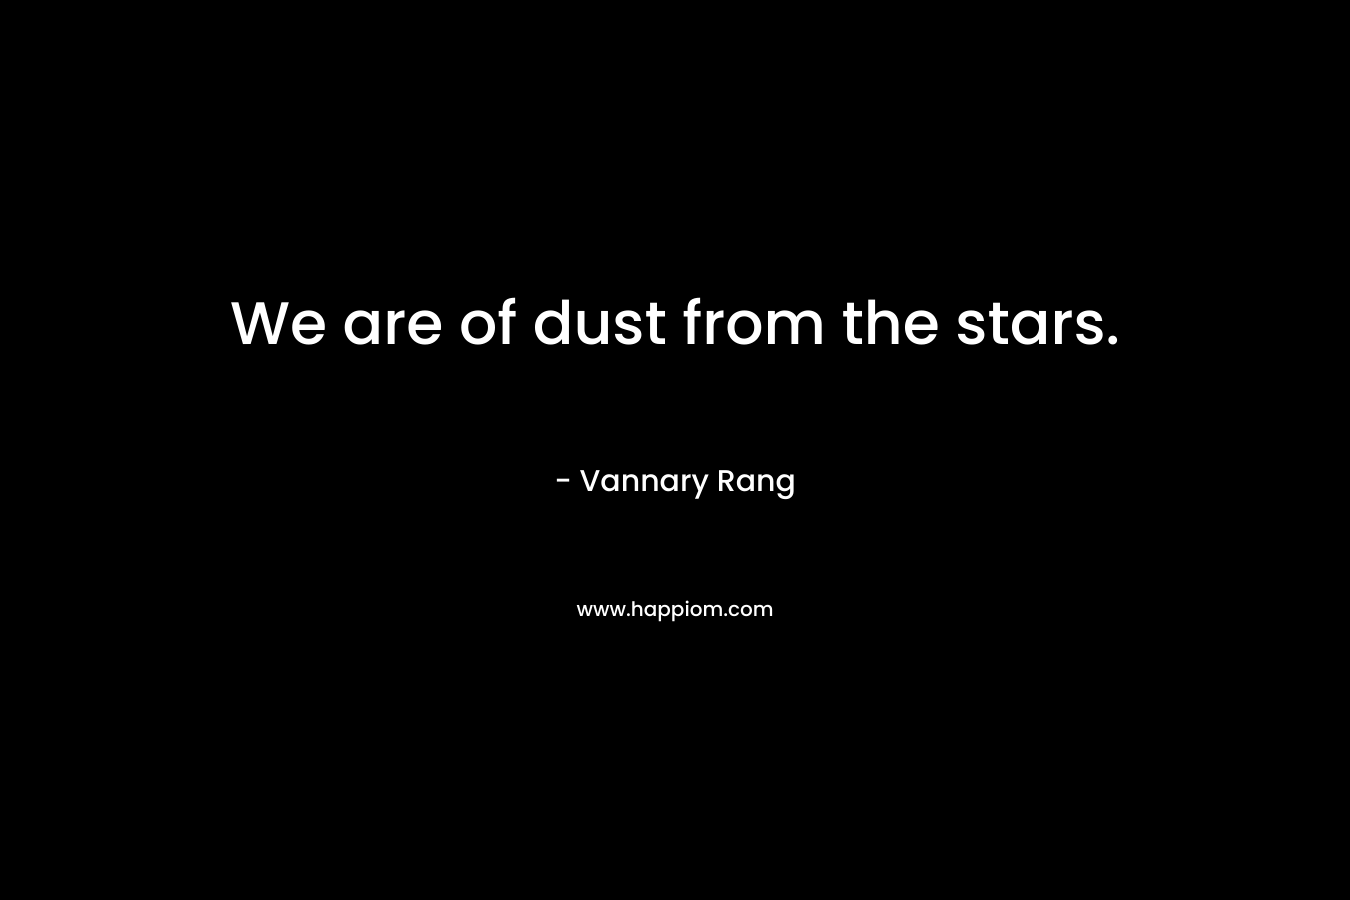 We are of dust from the stars.